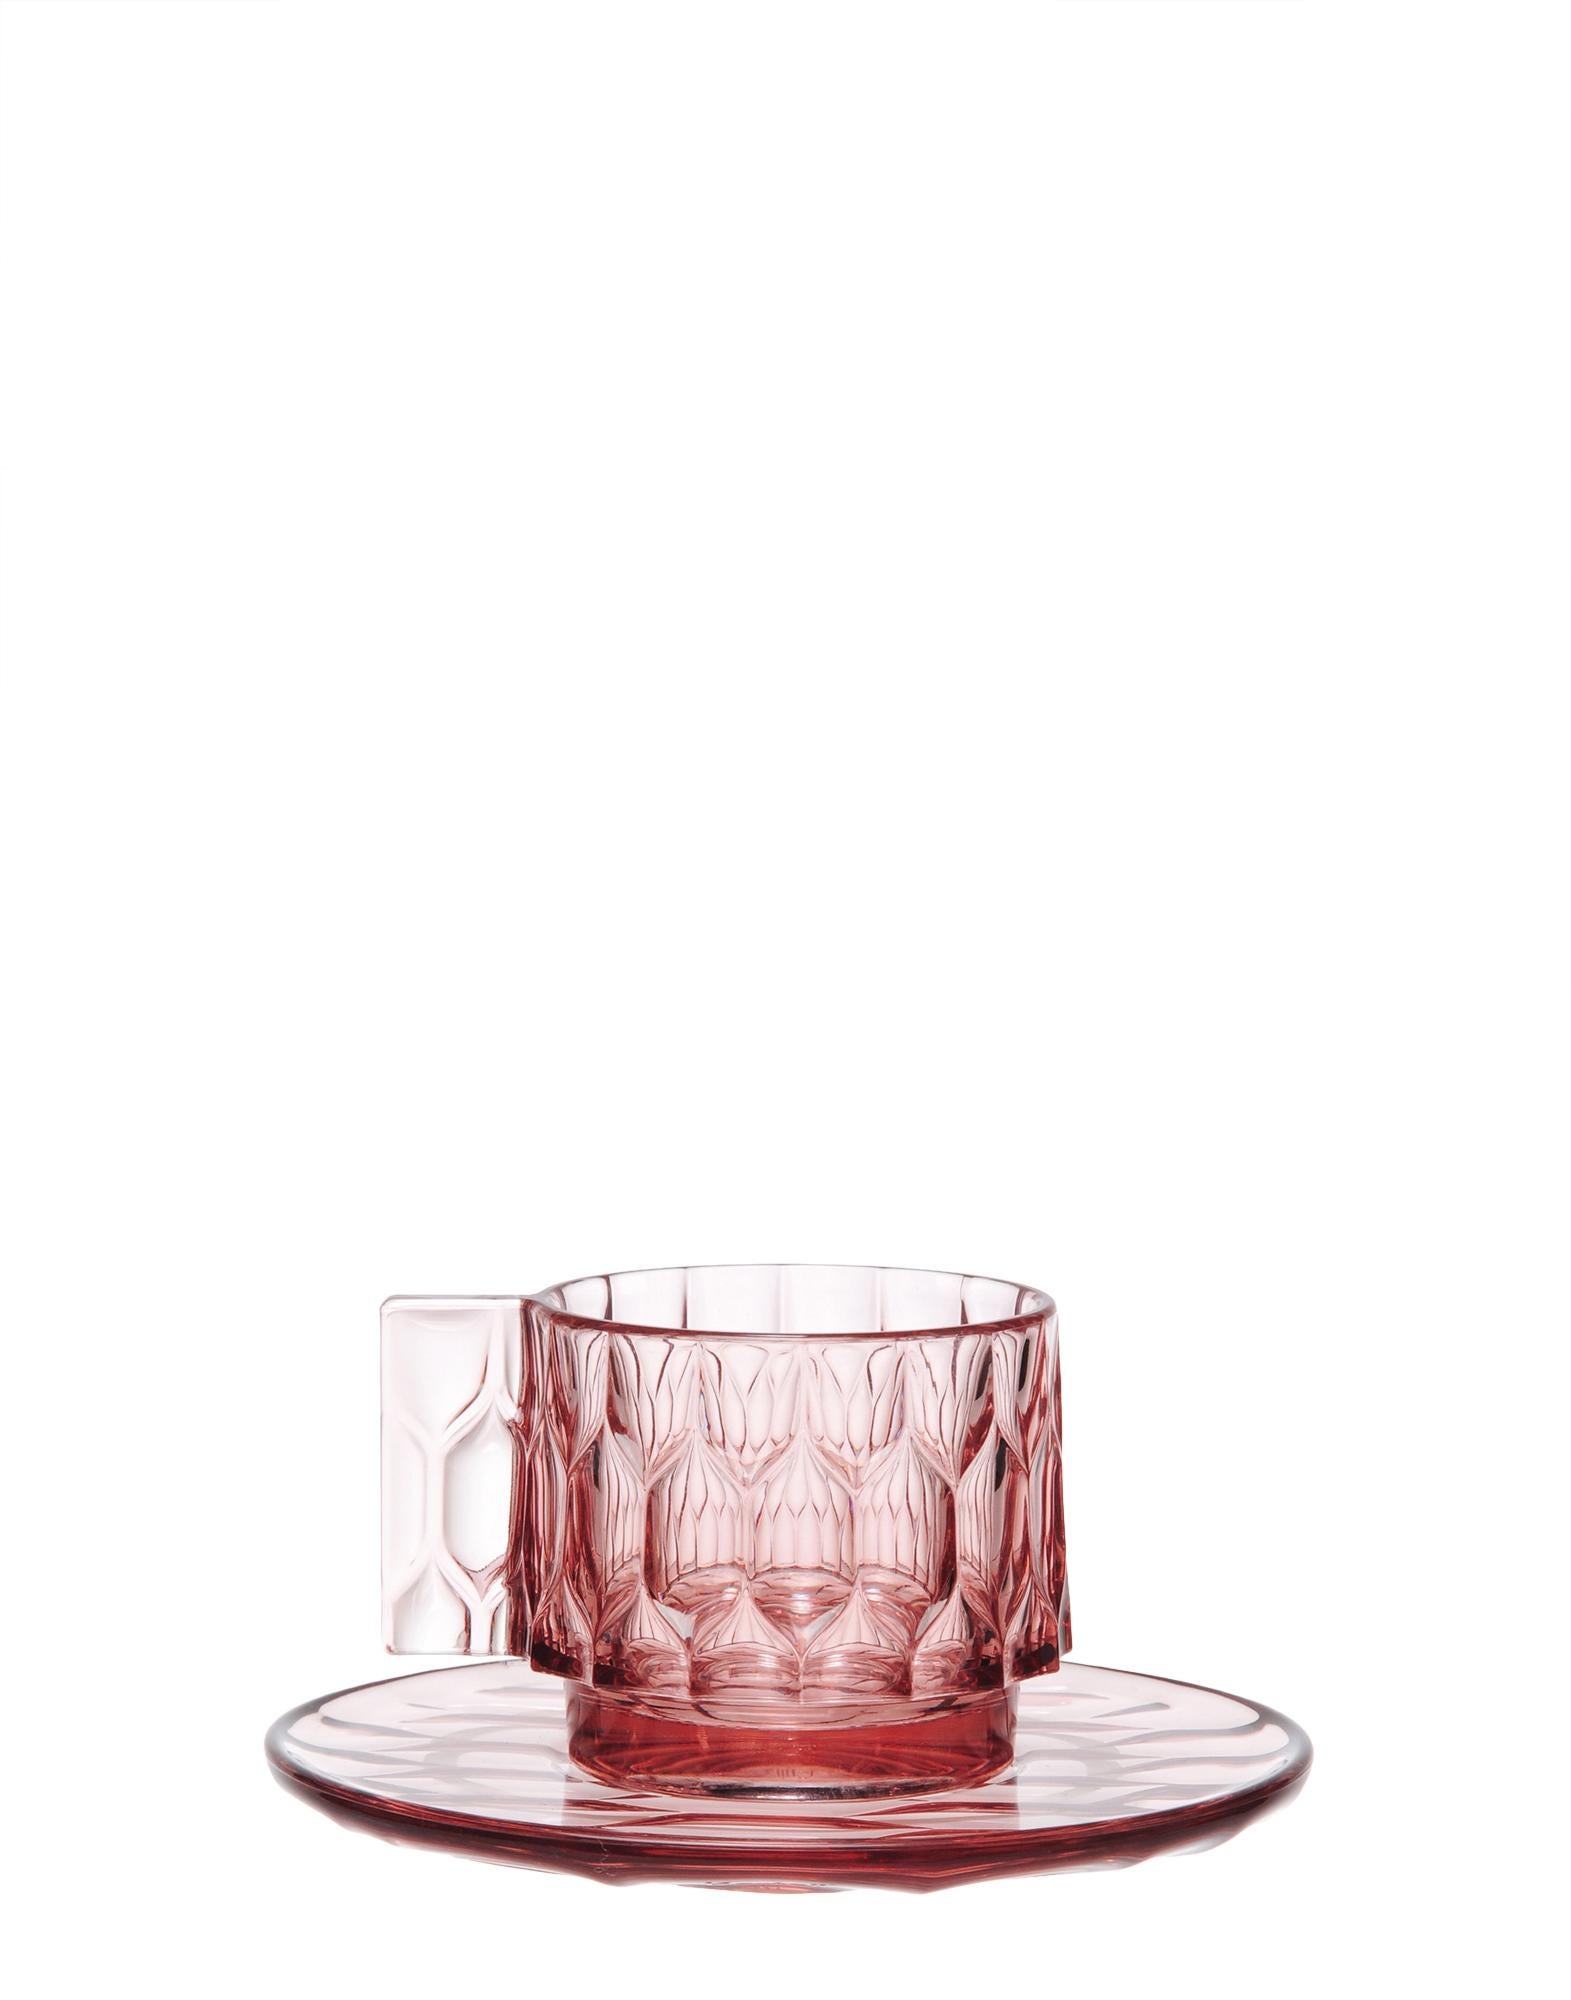 The Jellies Family, which heralded a new way of perceiving tableware by using transparent products moulded with various relief patterns, has been expanded to include new elements such as coffee services.

Dimensions: width 4.65 in, height 2.15 in,